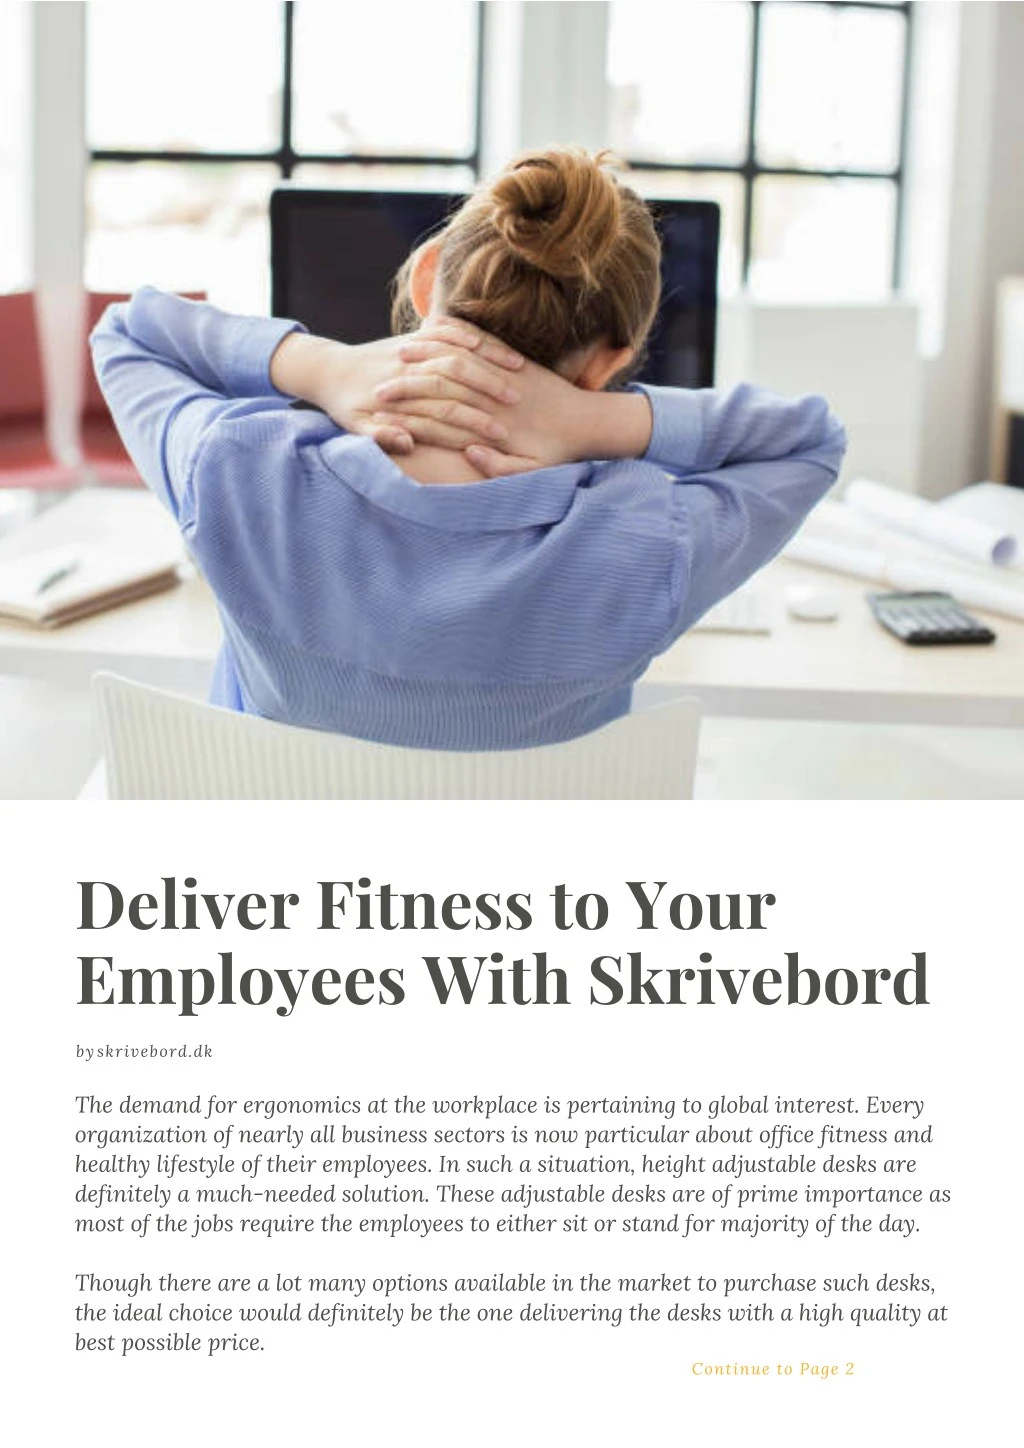 deliver fitness to your employees with skrivebord